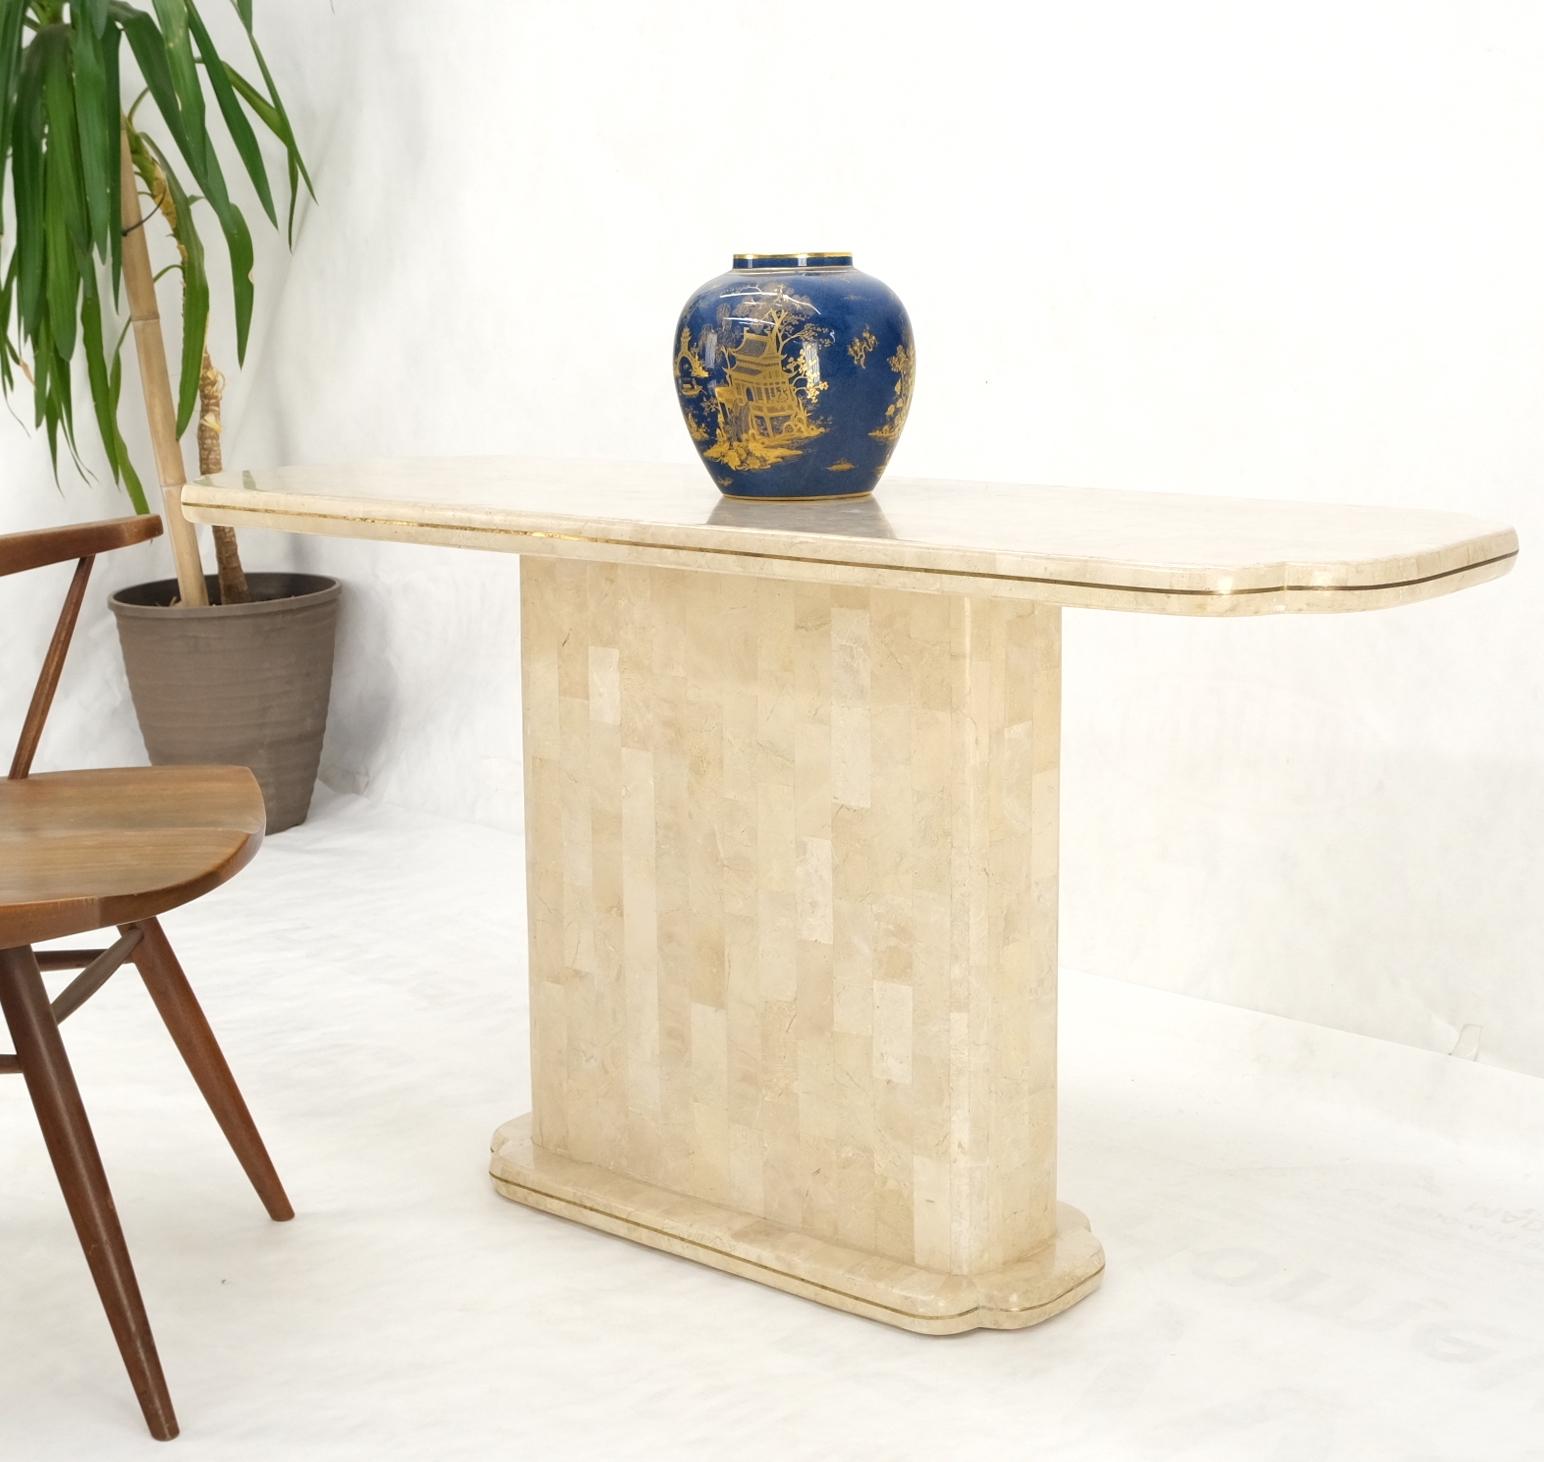 Tessellated stone brass inlay clove pattern ends sofa console table mint.